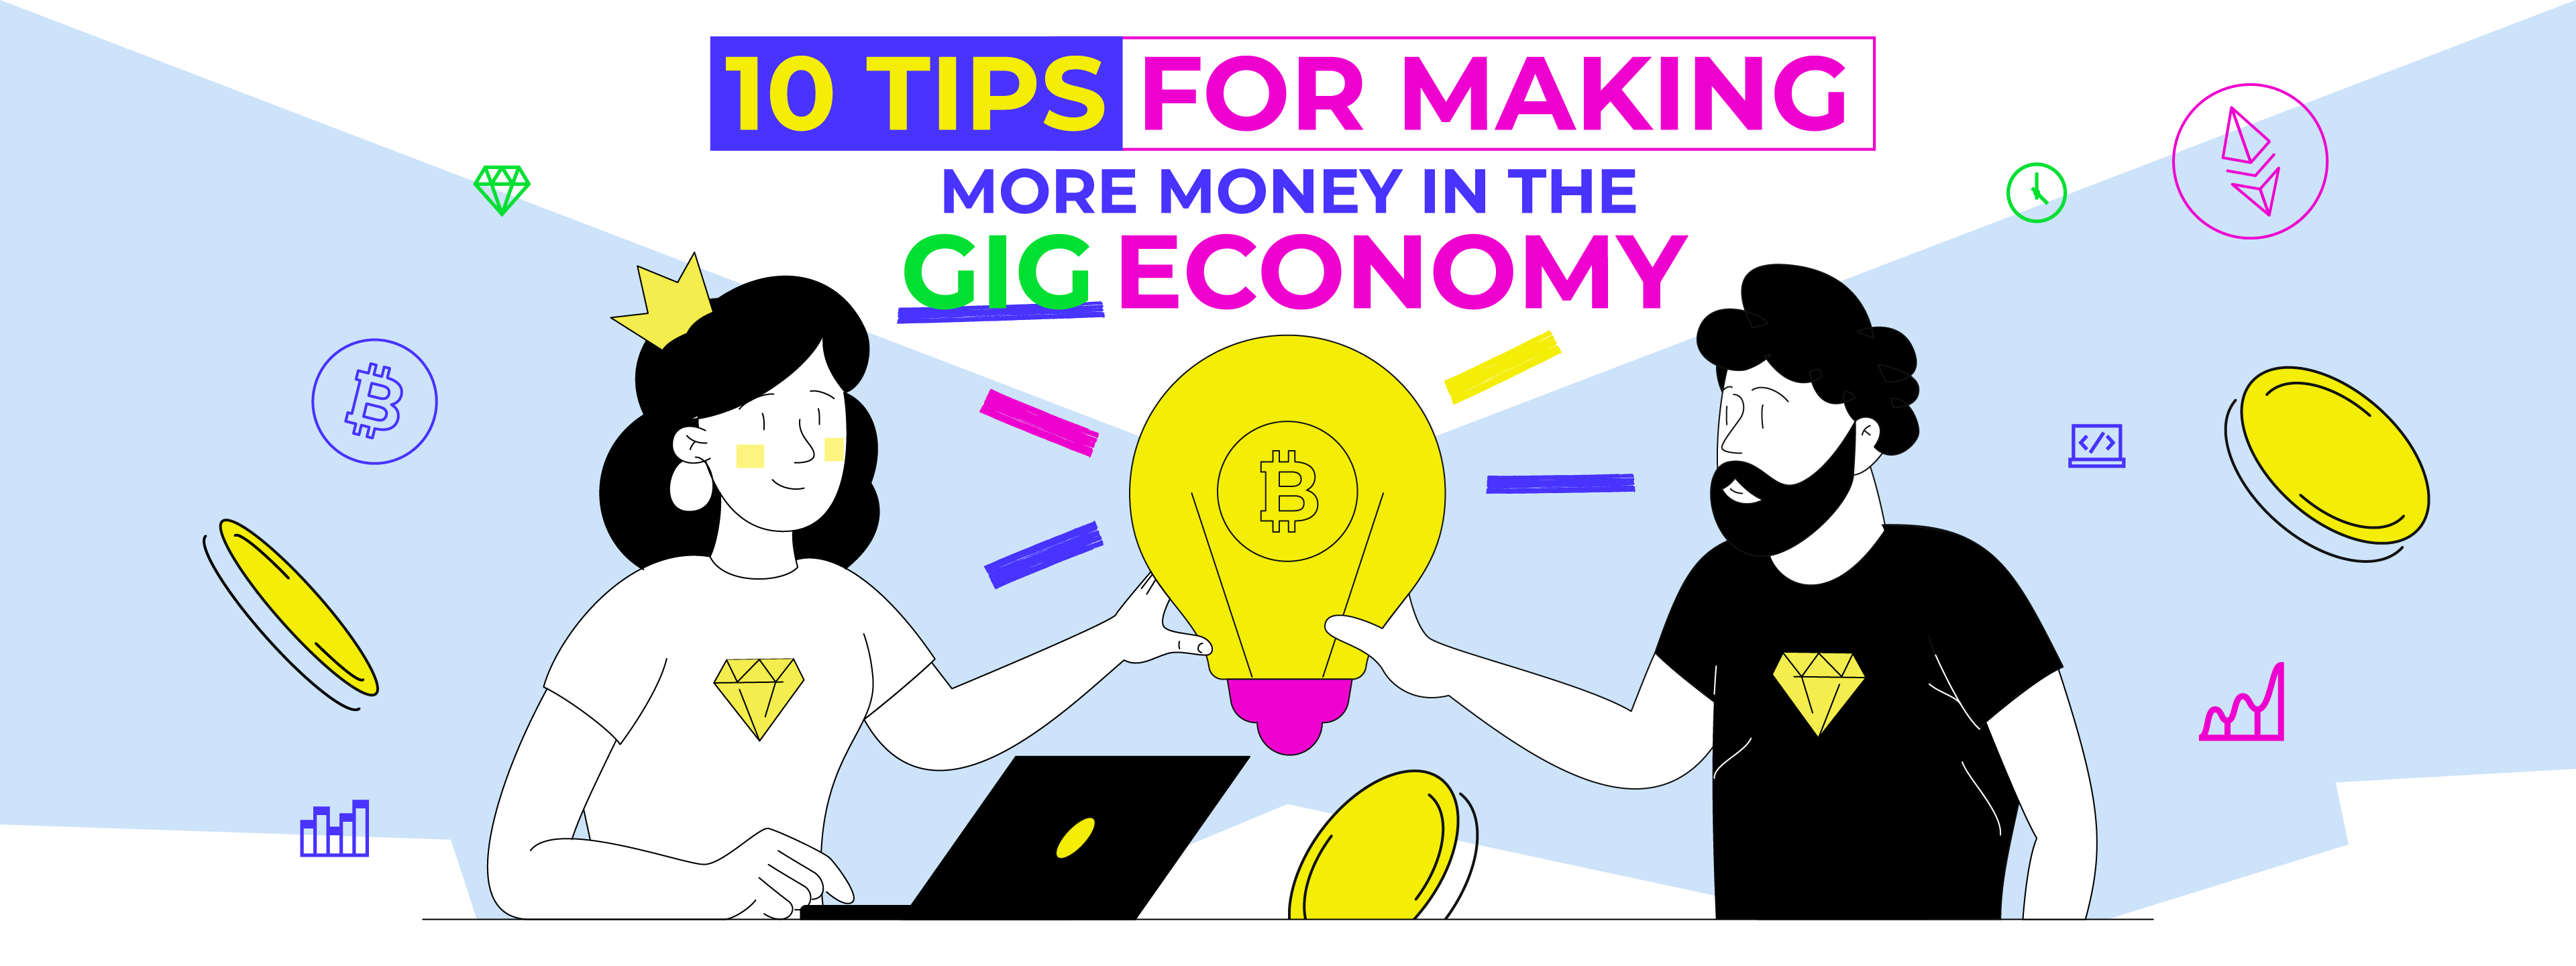 Ten Top Tips for Making More Money in the Gig Economy